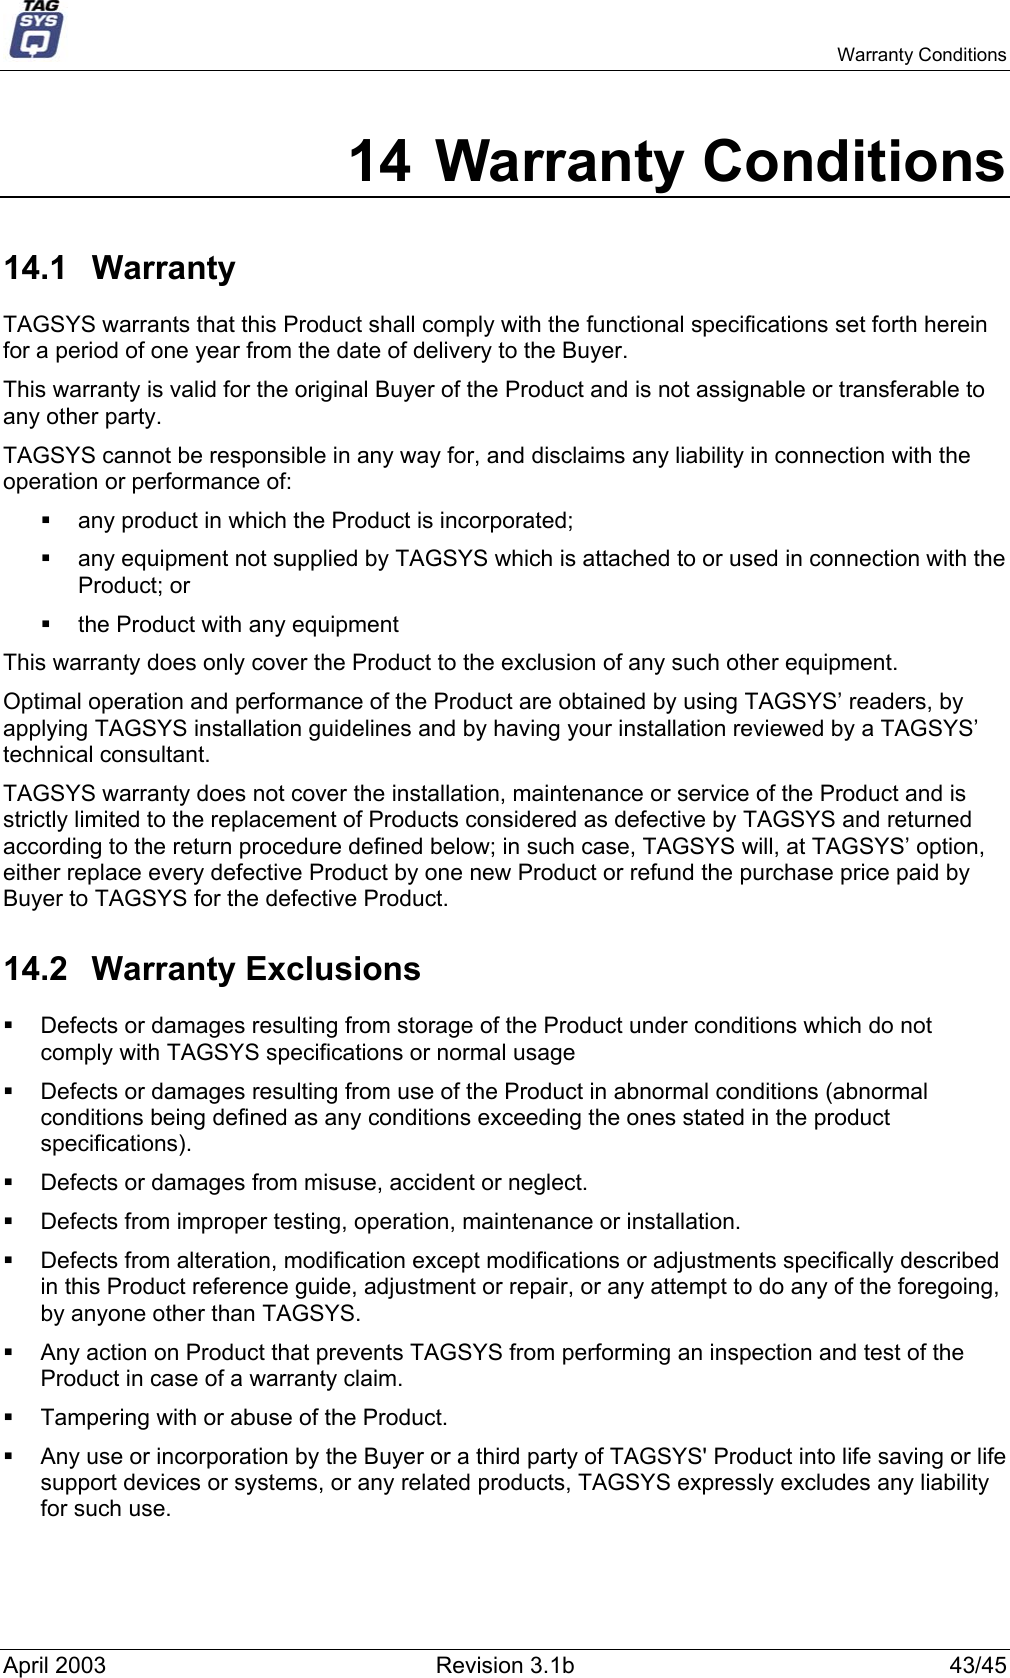   Warranty Conditions 14 Warranty Conditions 14.1 Warranty TAGSYS warrants that this Product shall comply with the functional specifications set forth herein for a period of one year from the date of delivery to the Buyer. This warranty is valid for the original Buyer of the Product and is not assignable or transferable to any other party. TAGSYS cannot be responsible in any way for, and disclaims any liability in connection with the operation or performance of:   any product in which the Product is incorporated;   any equipment not supplied by TAGSYS which is attached to or used in connection with the Product; or   the Product with any equipment This warranty does only cover the Product to the exclusion of any such other equipment. Optimal operation and performance of the Product are obtained by using TAGSYS’ readers, by applying TAGSYS installation guidelines and by having your installation reviewed by a TAGSYS’ technical consultant. TAGSYS warranty does not cover the installation, maintenance or service of the Product and is strictly limited to the replacement of Products considered as defective by TAGSYS and returned according to the return procedure defined below; in such case, TAGSYS will, at TAGSYS’ option, either replace every defective Product by one new Product or refund the purchase price paid by Buyer to TAGSYS for the defective Product. 14.2 Warranty Exclusions   Defects or damages resulting from storage of the Product under conditions which do not comply with TAGSYS specifications or normal usage   Defects or damages resulting from use of the Product in abnormal conditions (abnormal conditions being defined as any conditions exceeding the ones stated in the product specifications).   Defects or damages from misuse, accident or neglect.   Defects from improper testing, operation, maintenance or installation.   Defects from alteration, modification except modifications or adjustments specifically described in this Product reference guide, adjustment or repair, or any attempt to do any of the foregoing, by anyone other than TAGSYS.   Any action on Product that prevents TAGSYS from performing an inspection and test of the Product in case of a warranty claim.   Tampering with or abuse of the Product.   Any use or incorporation by the Buyer or a third party of TAGSYS&apos; Product into life saving or life support devices or systems, or any related products, TAGSYS expressly excludes any liability for such use. April 2003  Revision 3.1b  43/45 